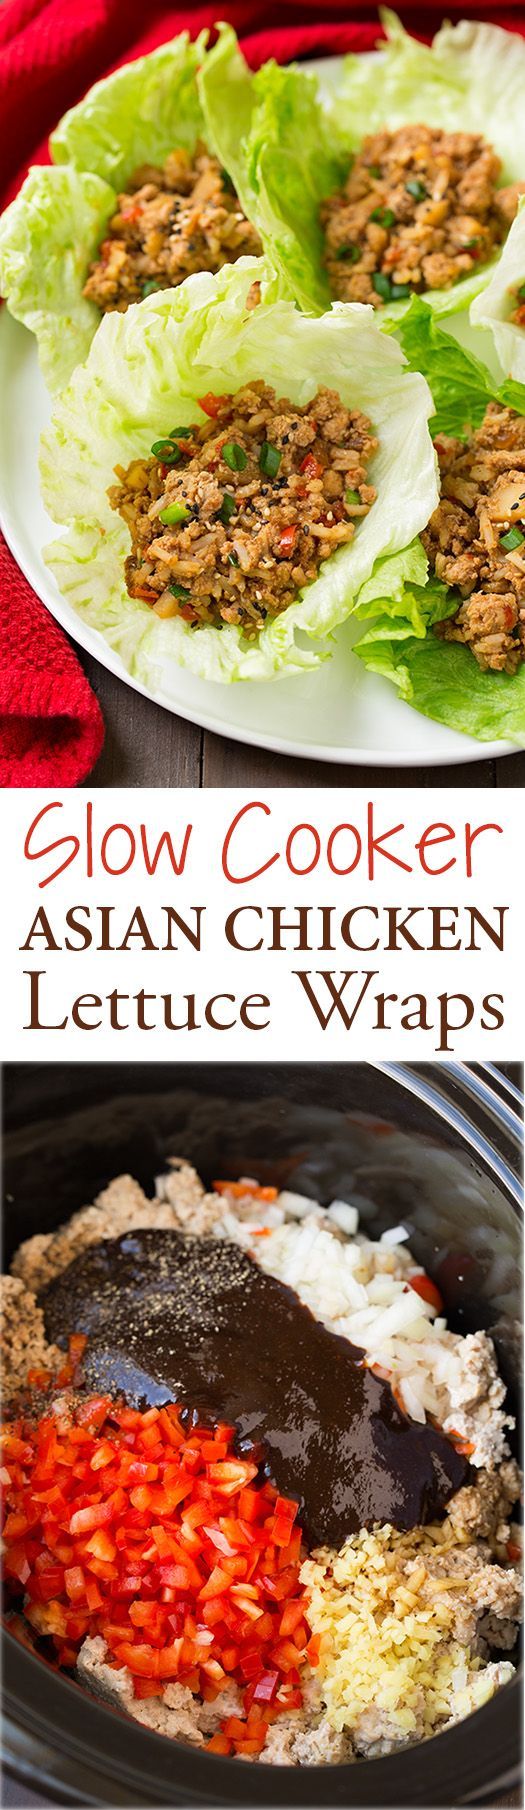 Slow Cooker Asian Chicken Lettuce Wraps – these easiest lettuce wraps and they’re completely delicious!